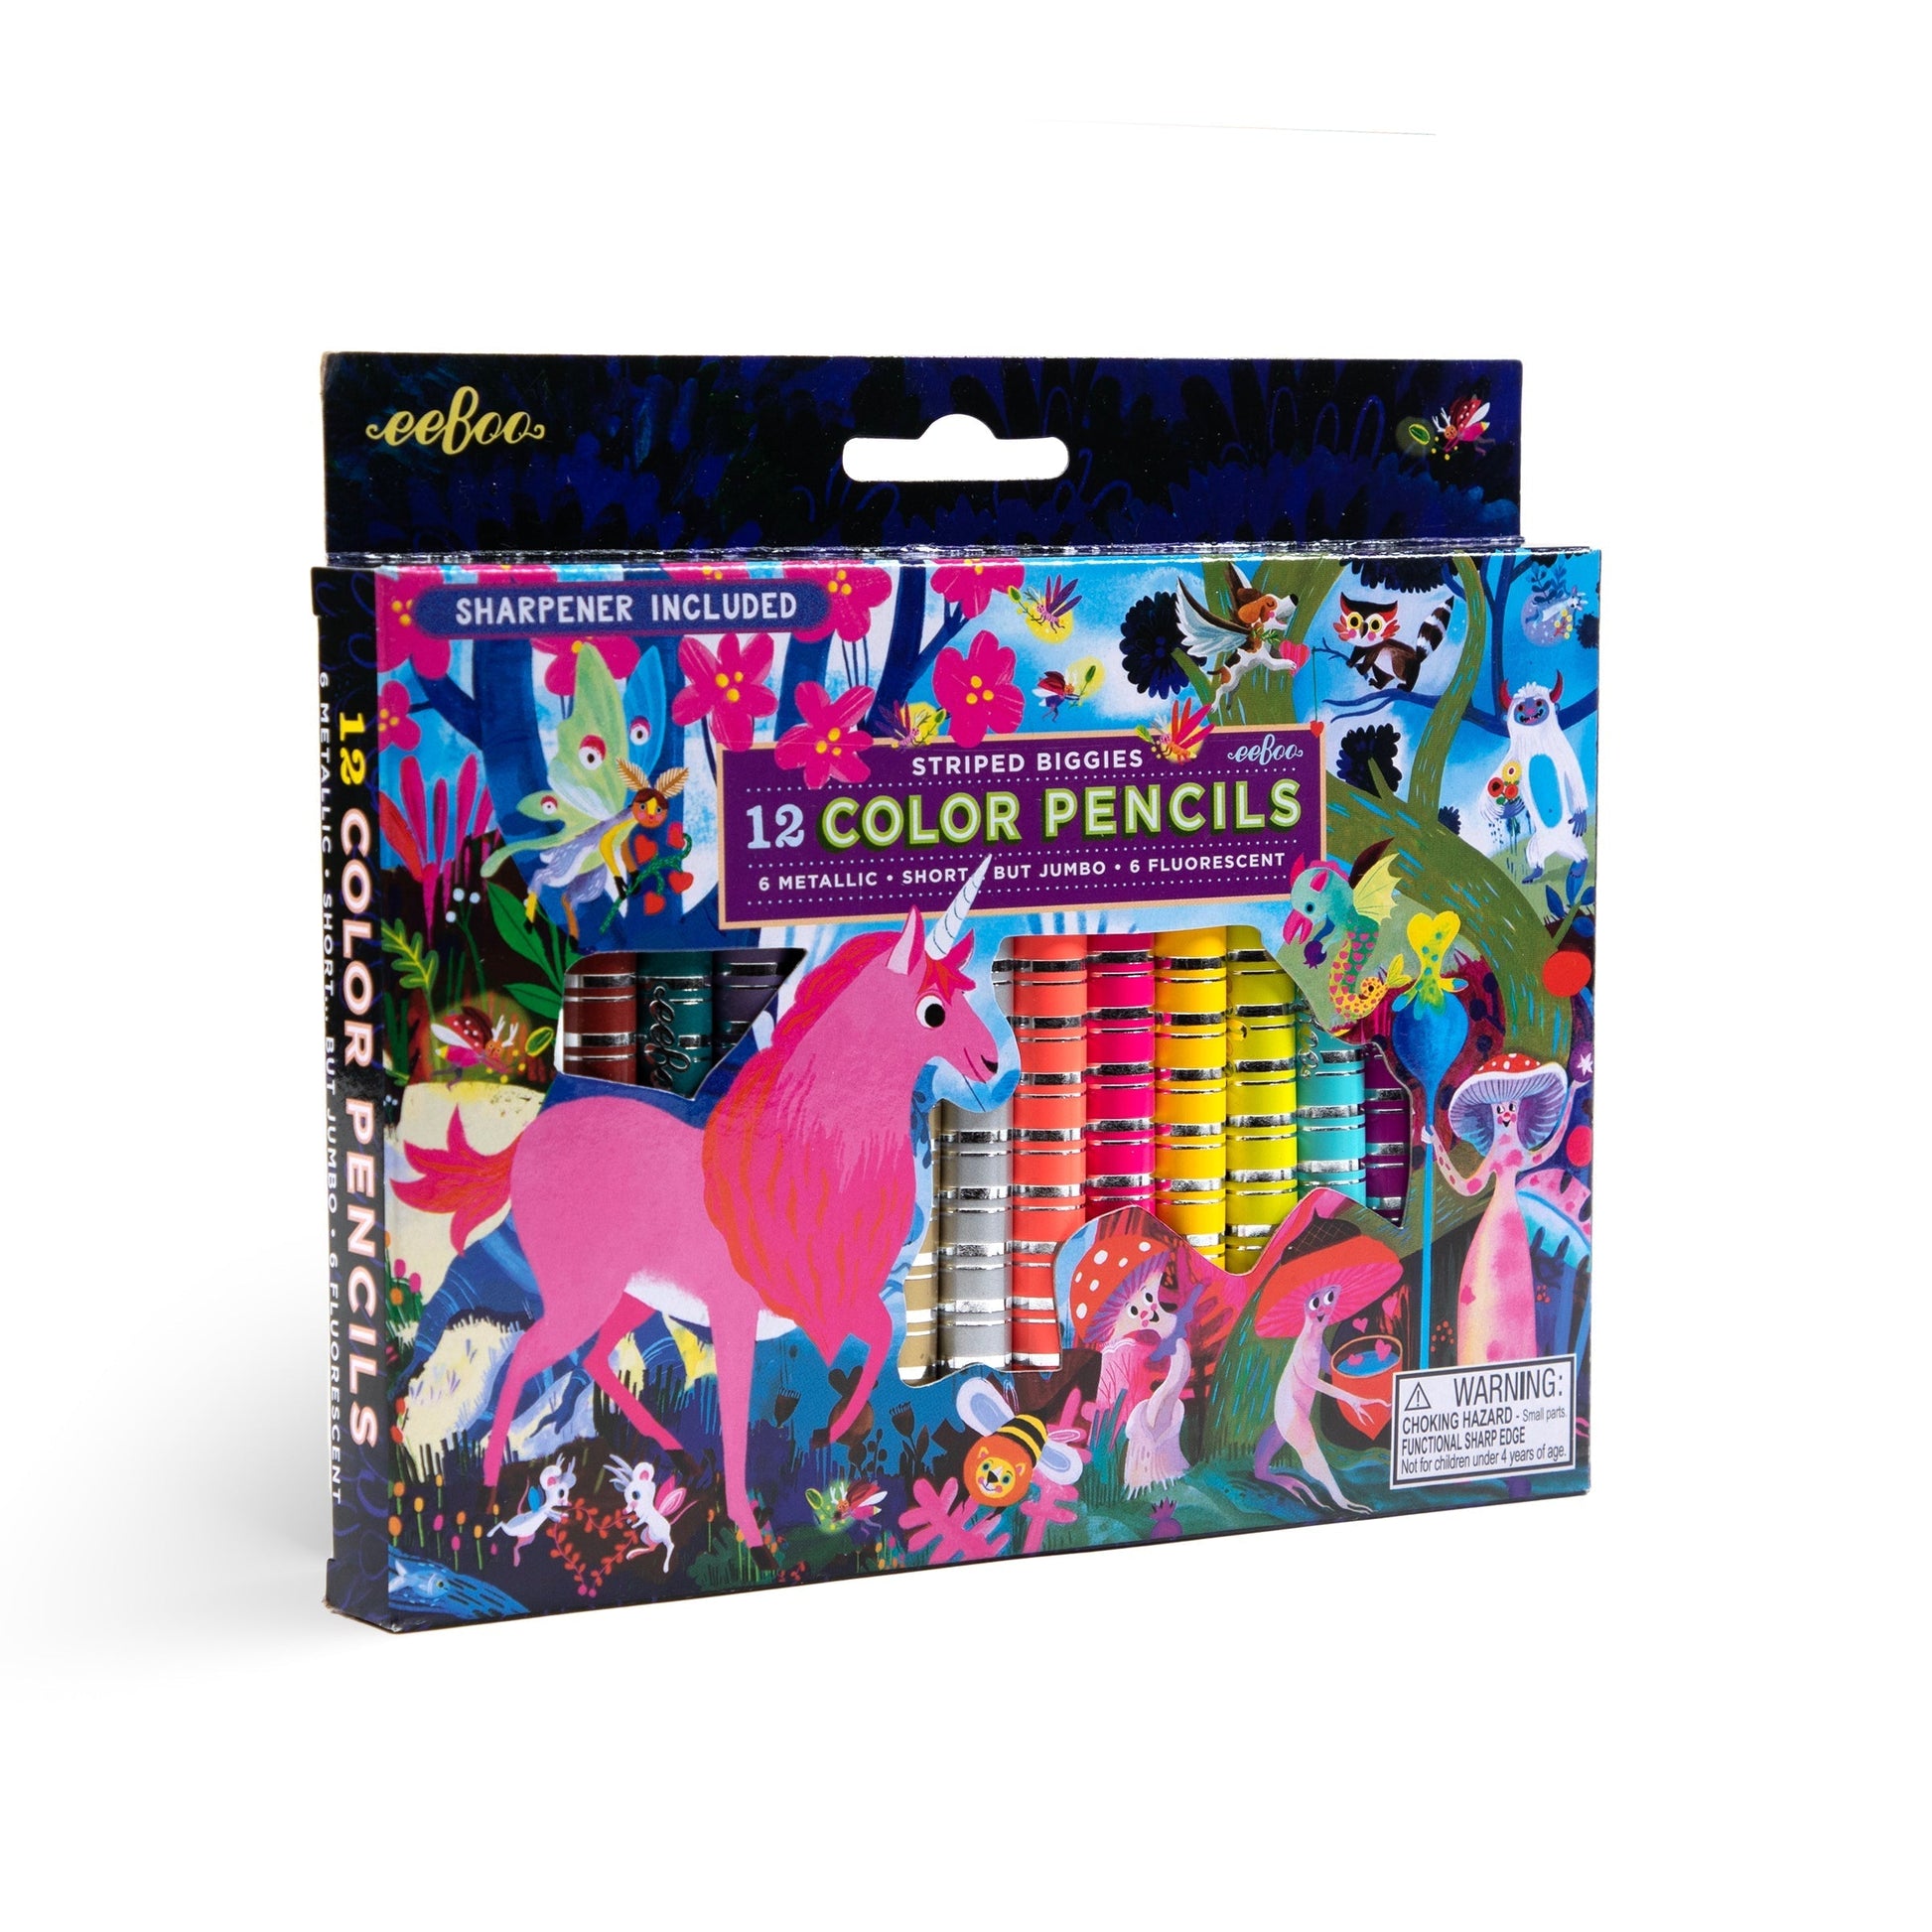 You're a Unicorn - Sketch Book: Magical Blank Drawing Pad for for Girls,  Boys and Kids Ages 3, 4, 5, 6, 7, 8, 9, and 10 Years Old - A Creative Arts .